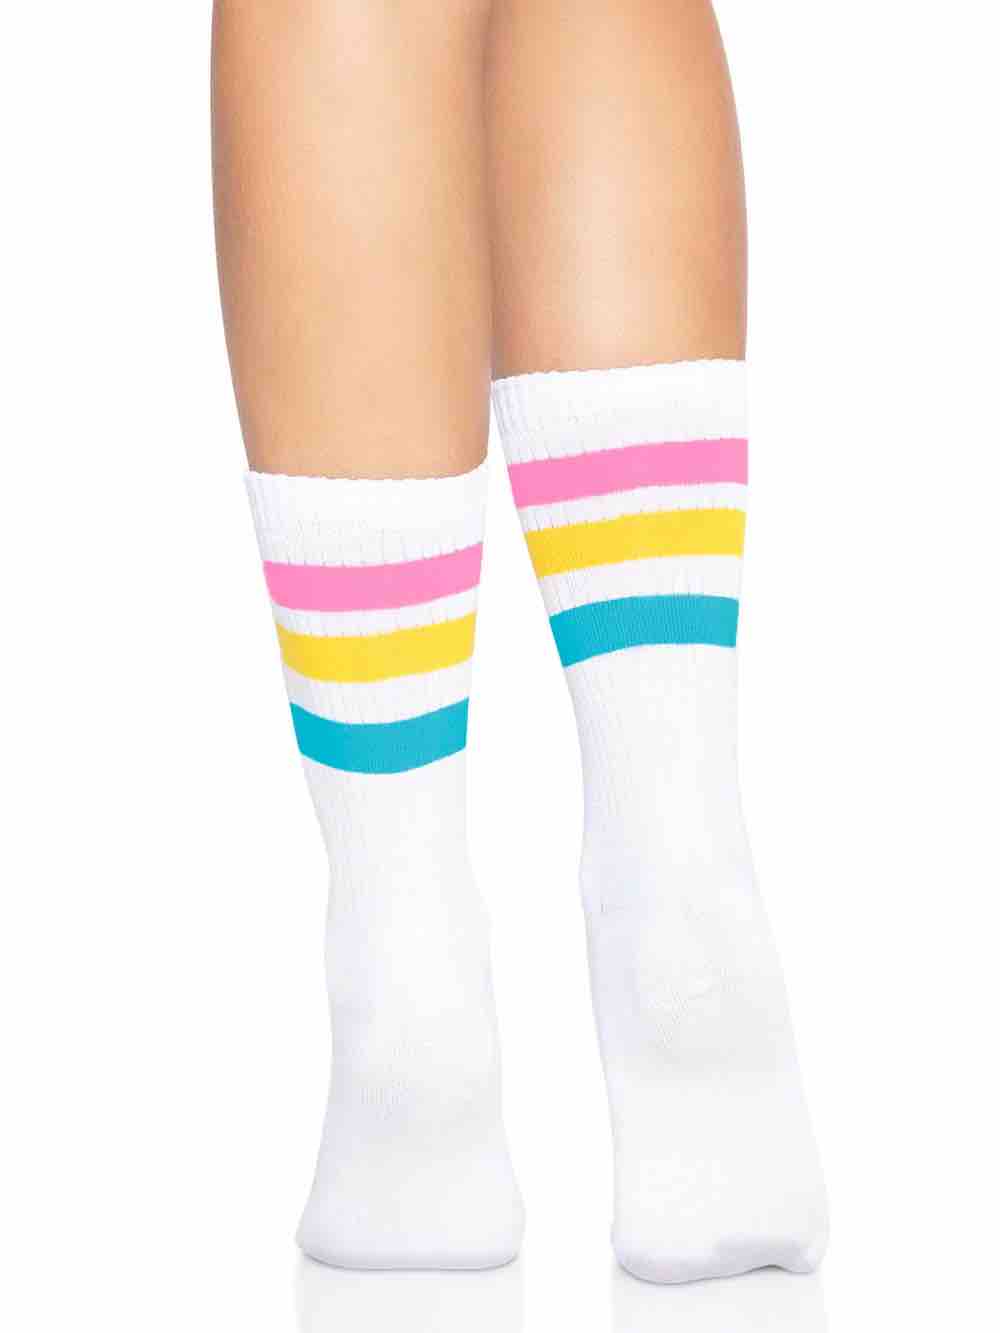 The Pansexual Pride Flag Crew Socks on a model, rear view.